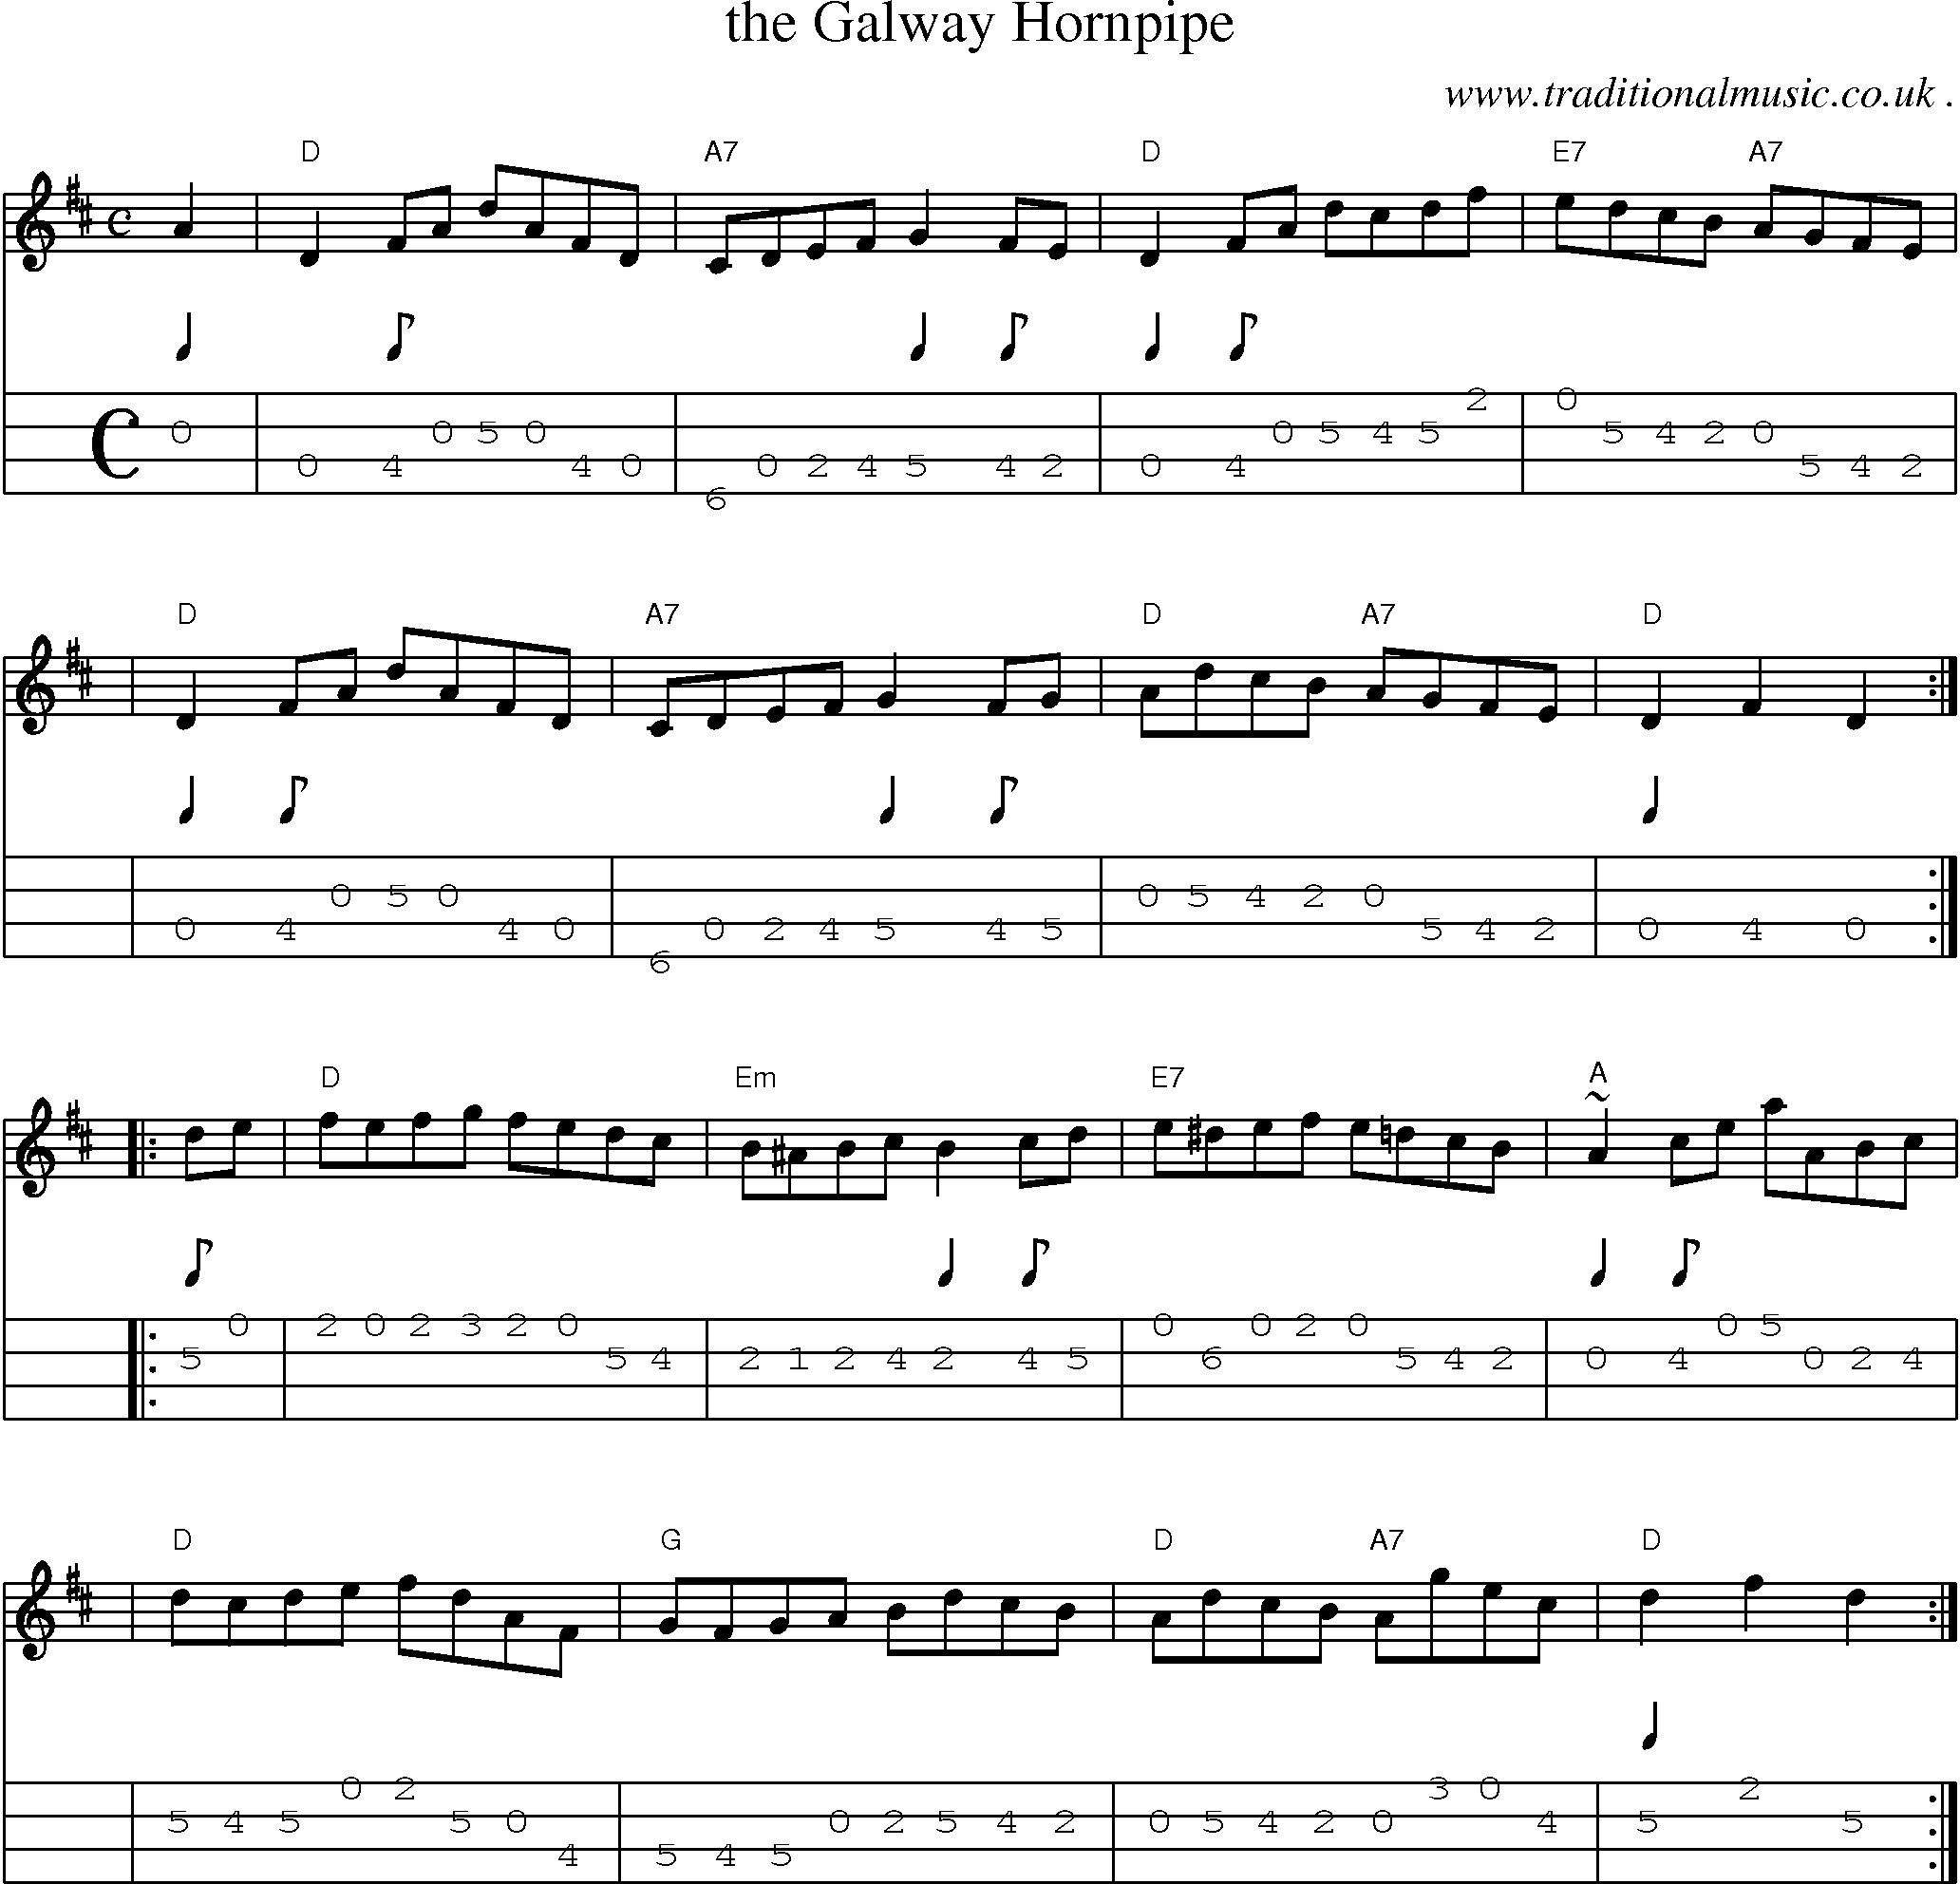 Sheet-music  score, Chords and Mandolin Tabs for The Galway Hornpipe